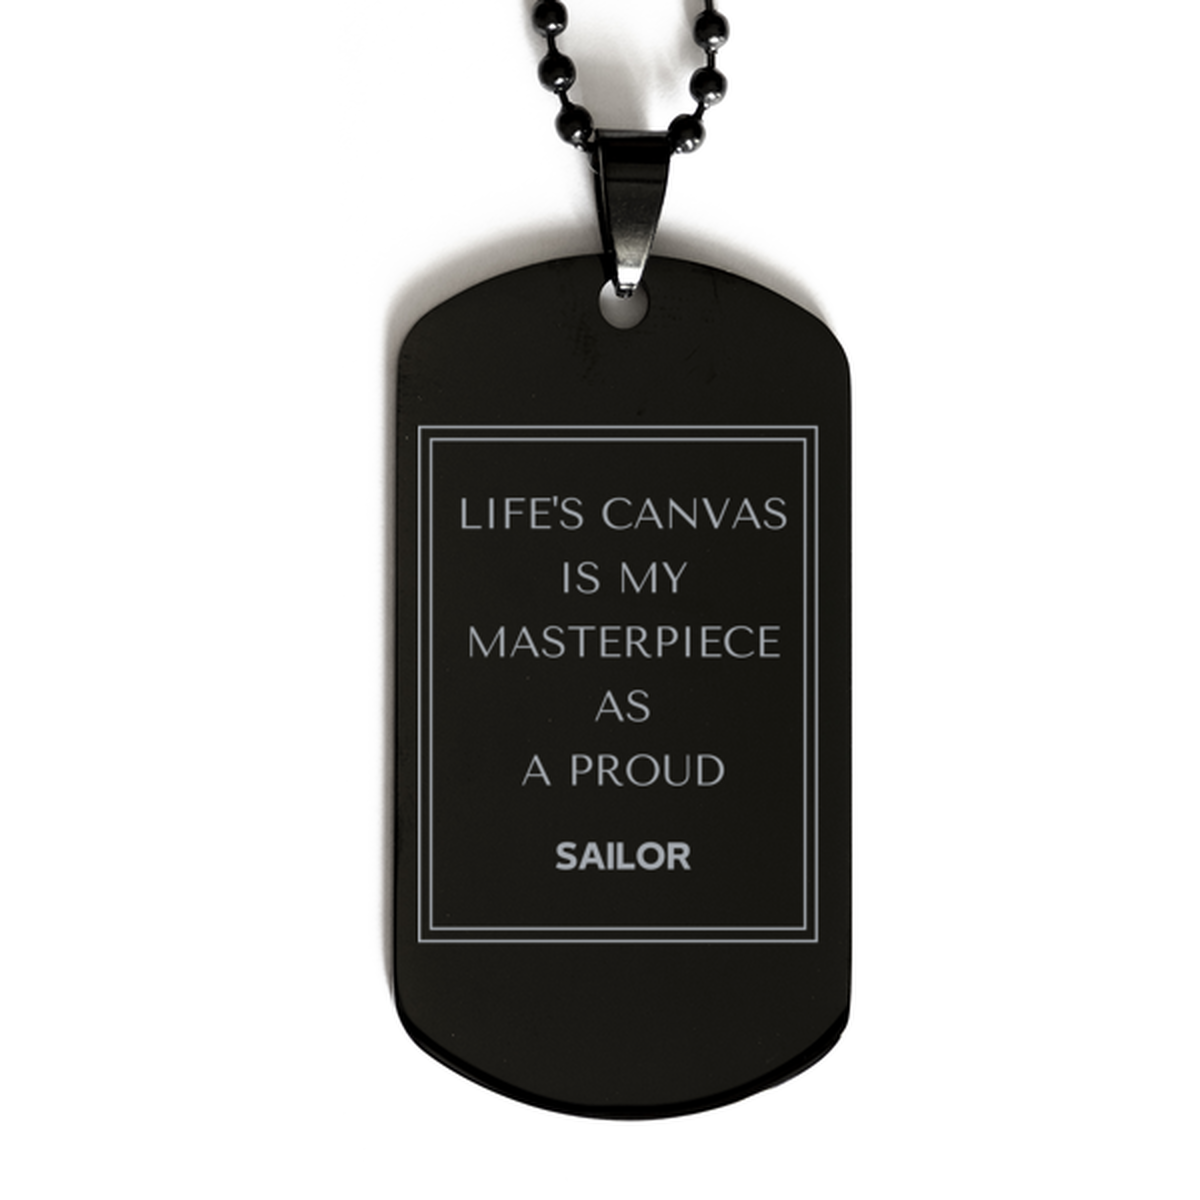 Proud Sailor Gifts, Life's canvas is my masterpiece, Epic Birthday Christmas Unique Black Dog Tag For Sailor, Coworkers, Men, Women, Friends